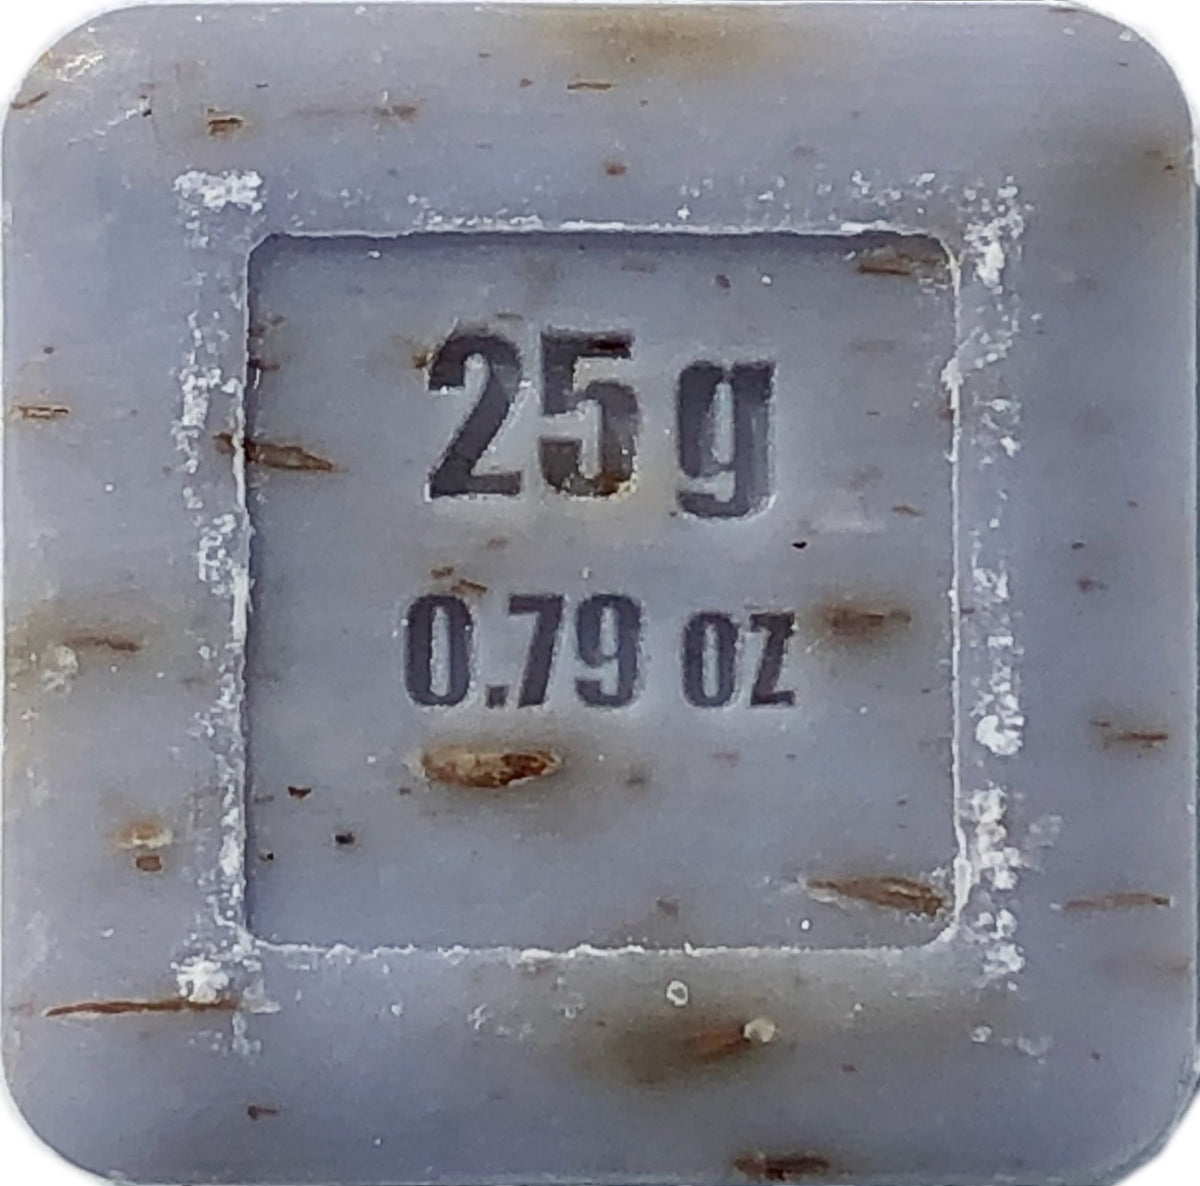 Close-up of a square label on La Lavande Lavender Flower Guest Soap 25gm reading "25g" and "0.79 oz," surrounded by lavender flowers, and embedded in a textured surface.